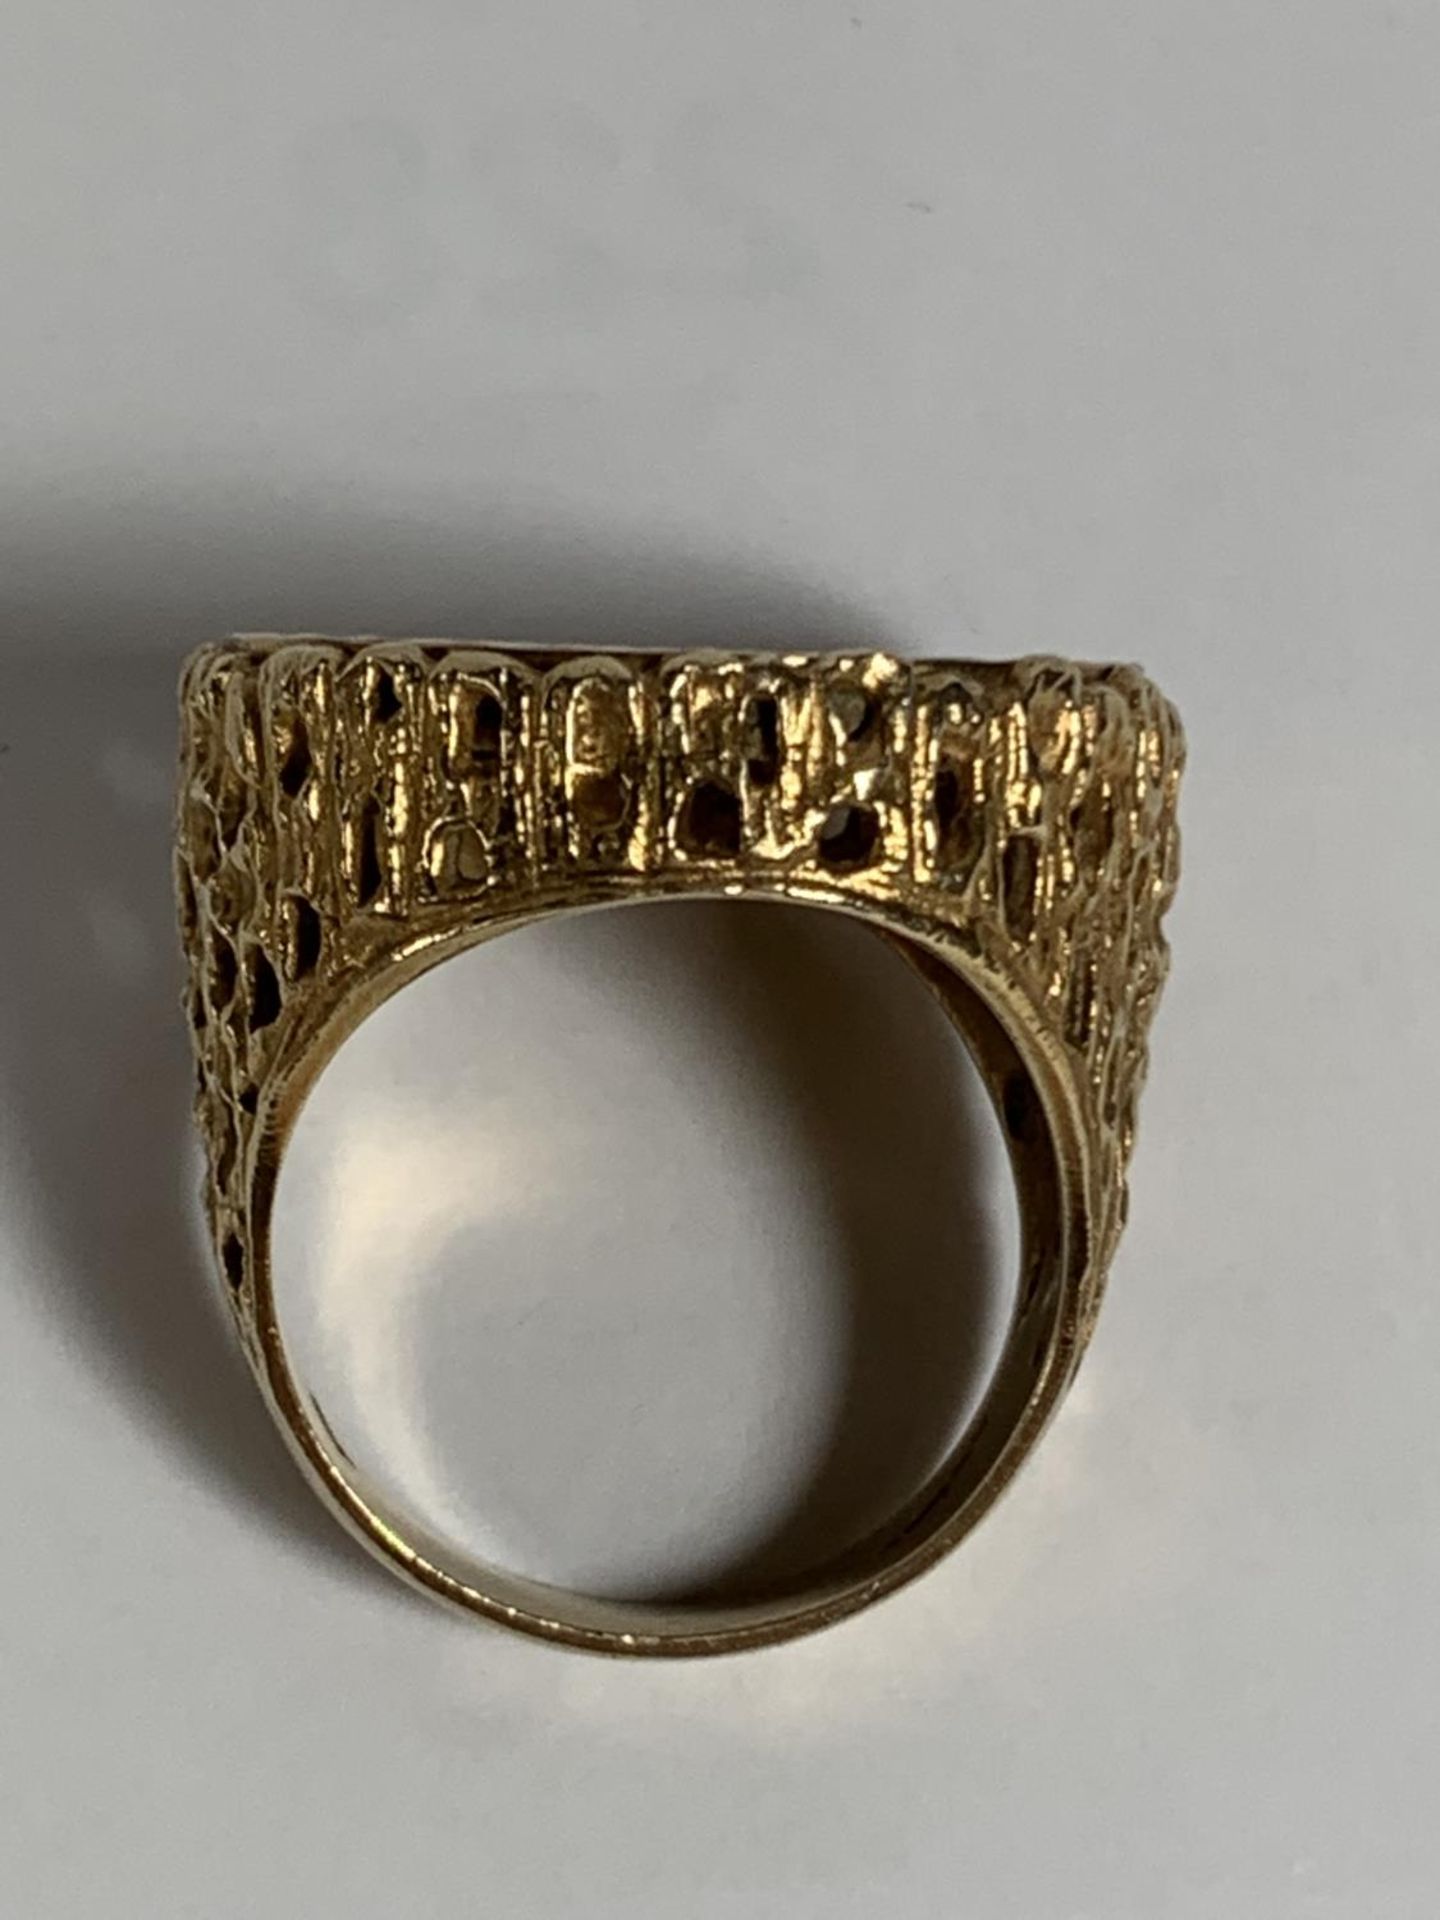 A 9 CARAT GOLD RING WITH A GEORGE V 1911 FULL SOVERIEGN GROSS WEIGHT 18.94 GRAMS - Image 3 of 3